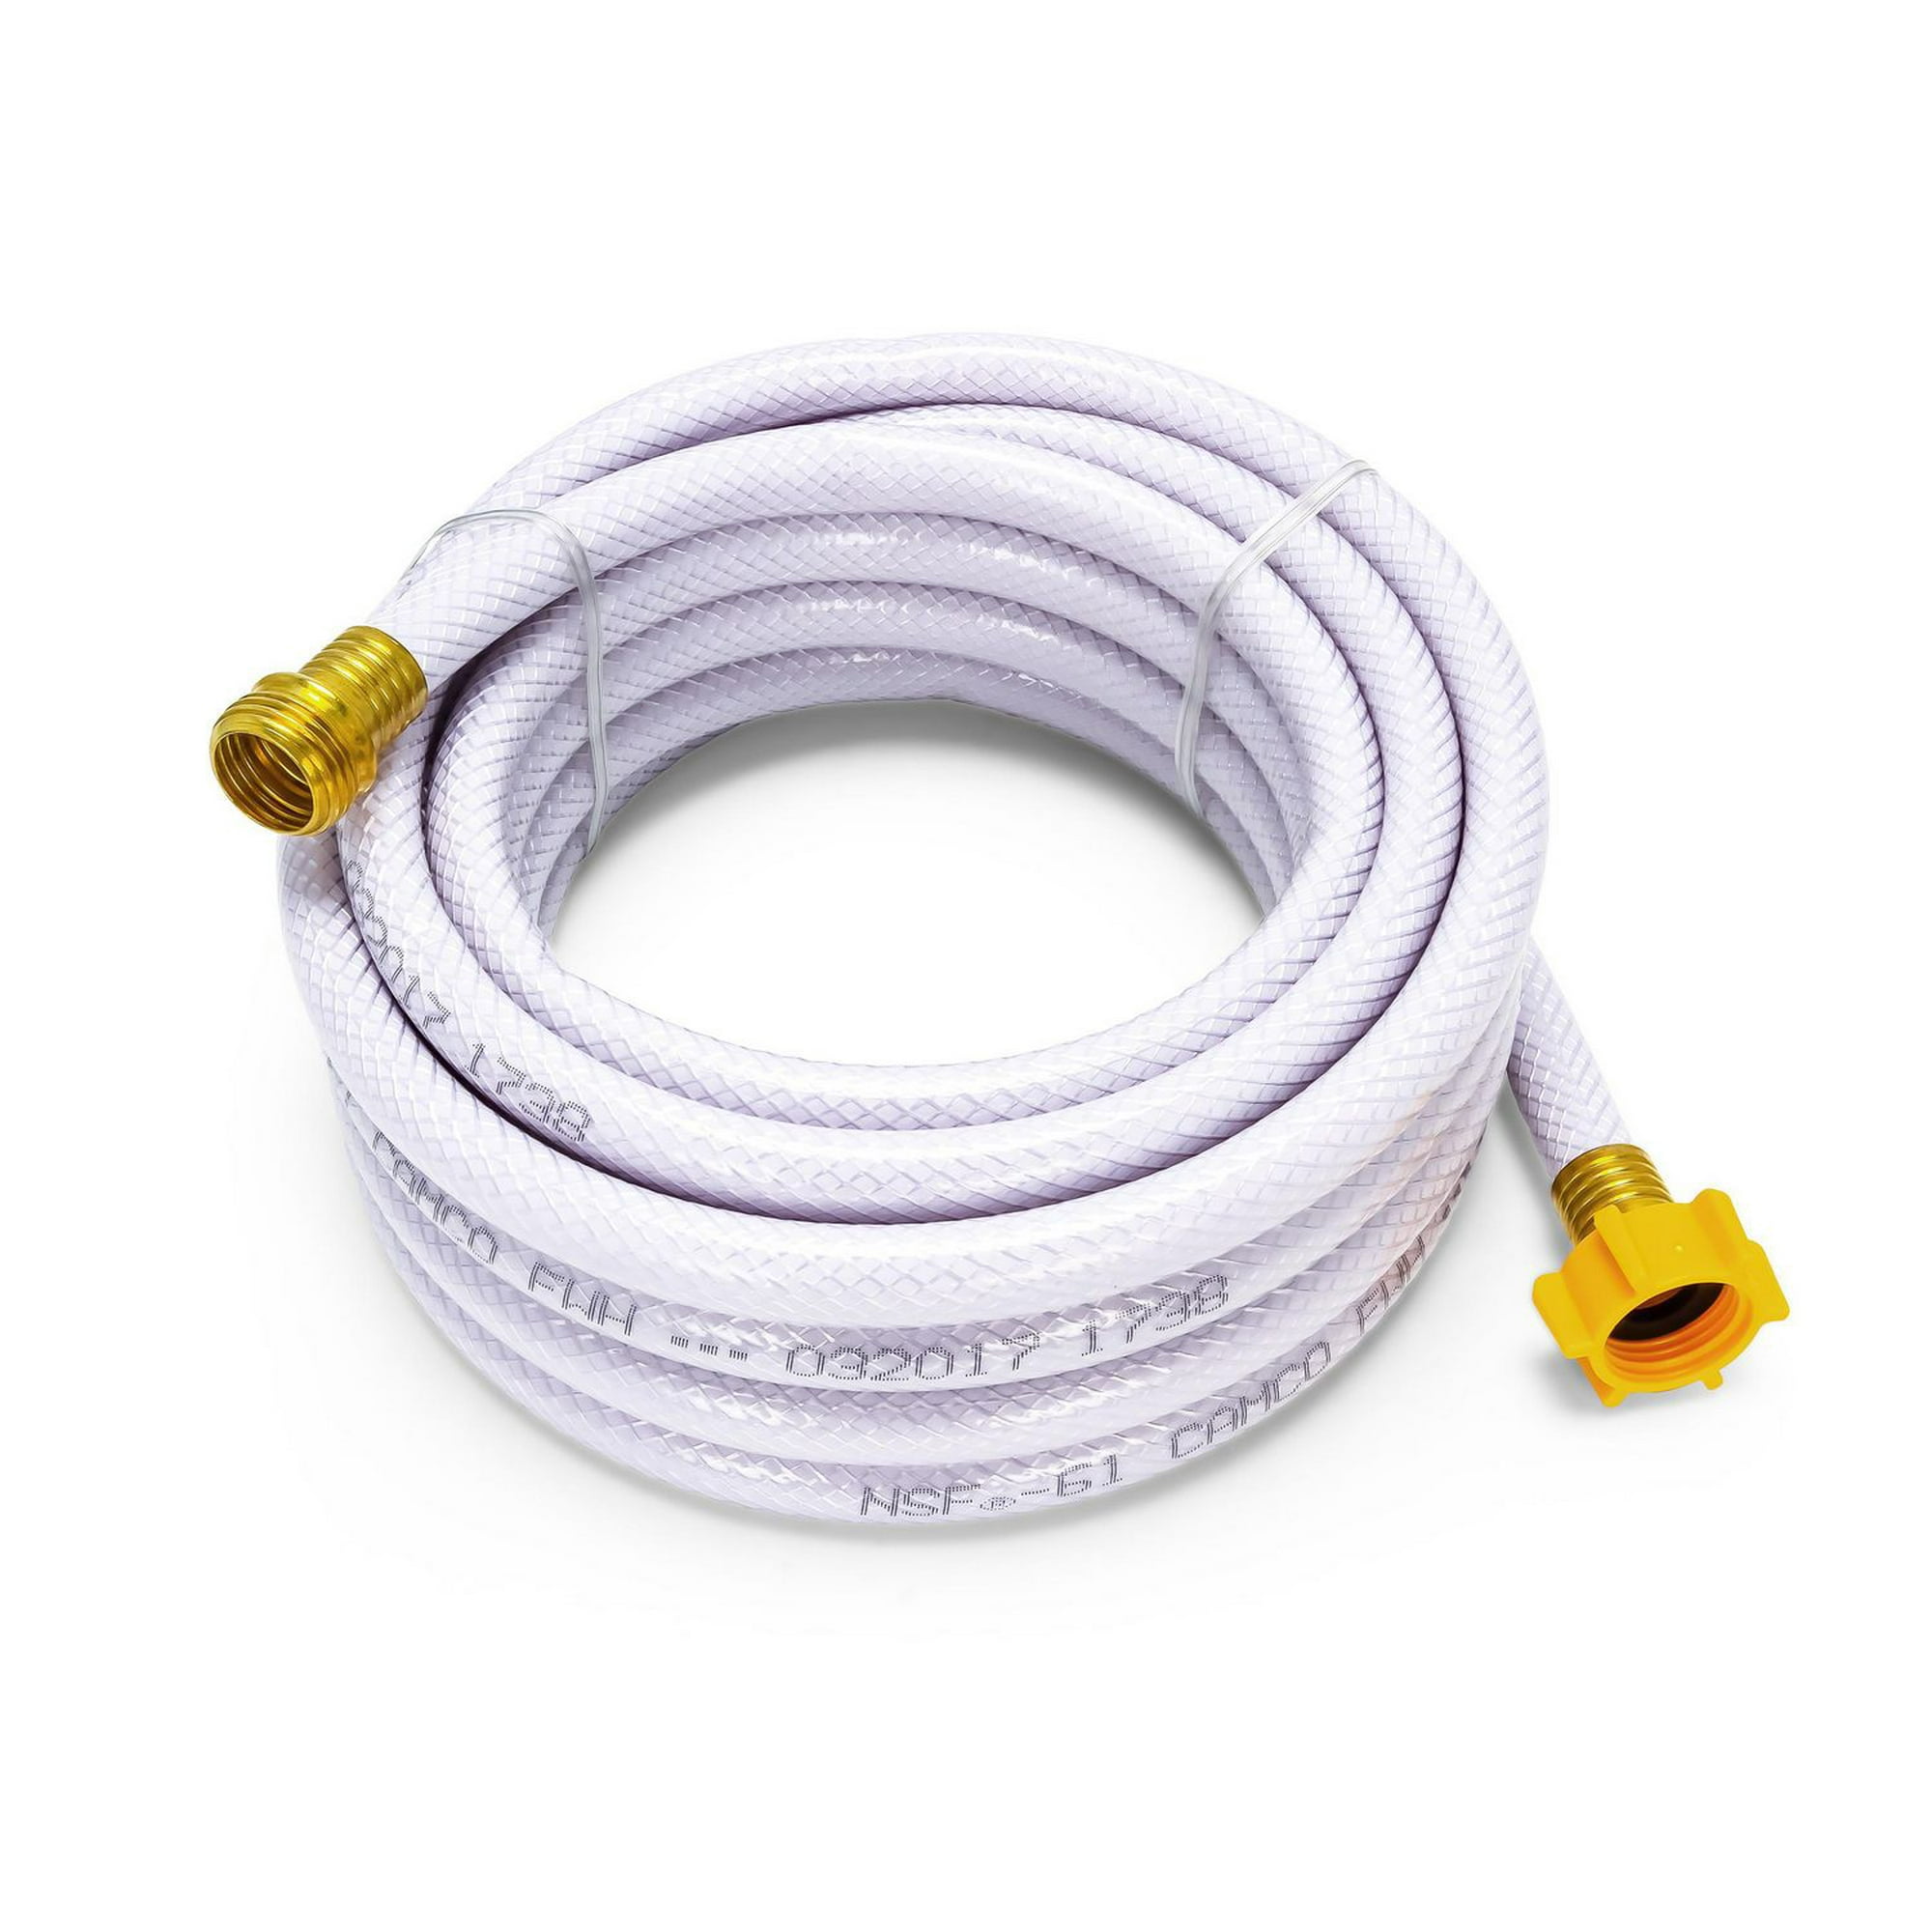 Camco 22735 25' Drinking Water Hose, Drinking water safe 